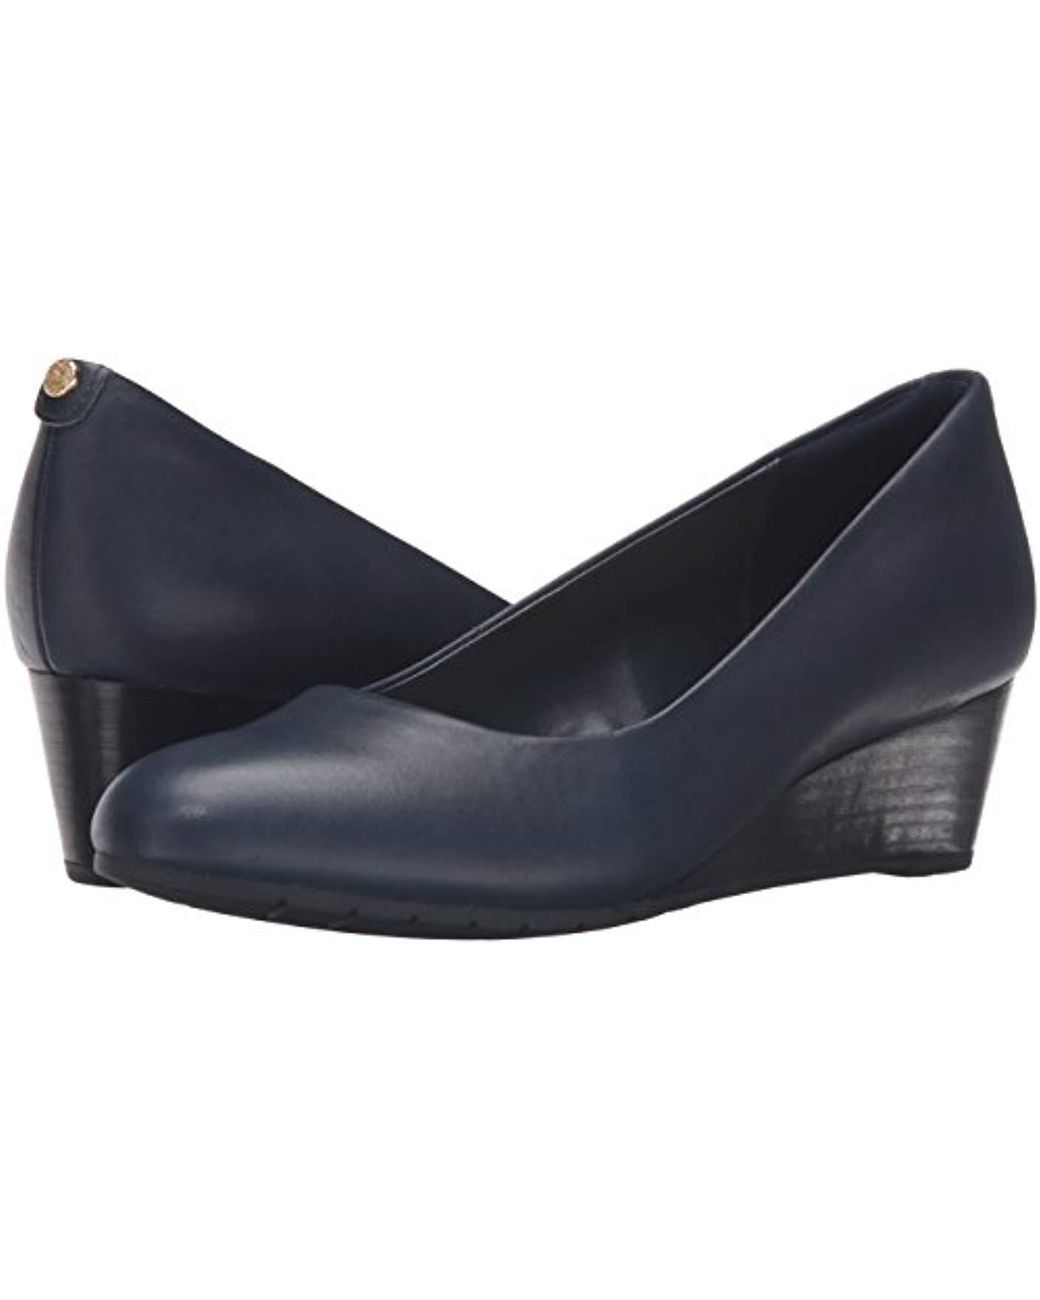 Clarks Leather Vendra Bloom Wedge Pump in Navy Leather (Blue) | Lyst UK